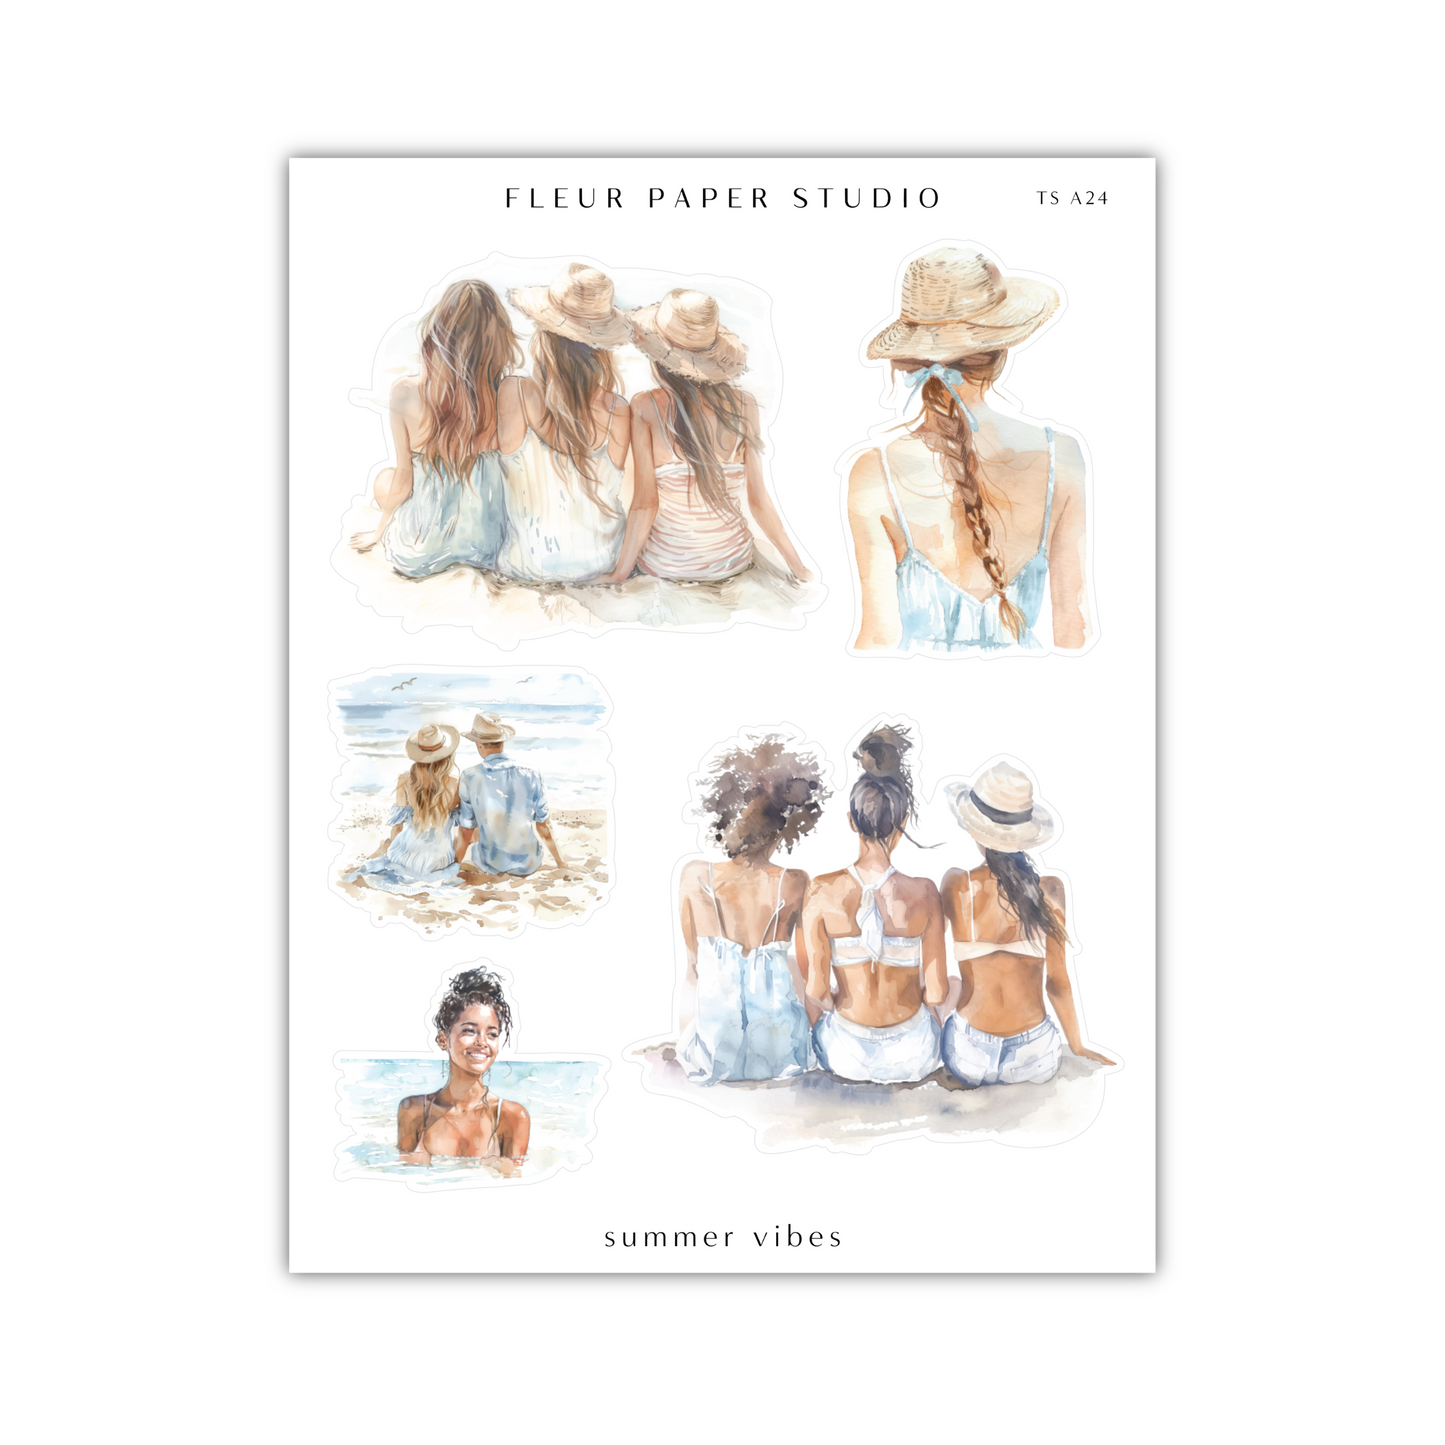 a watercolor painting of four women sitting on the beach